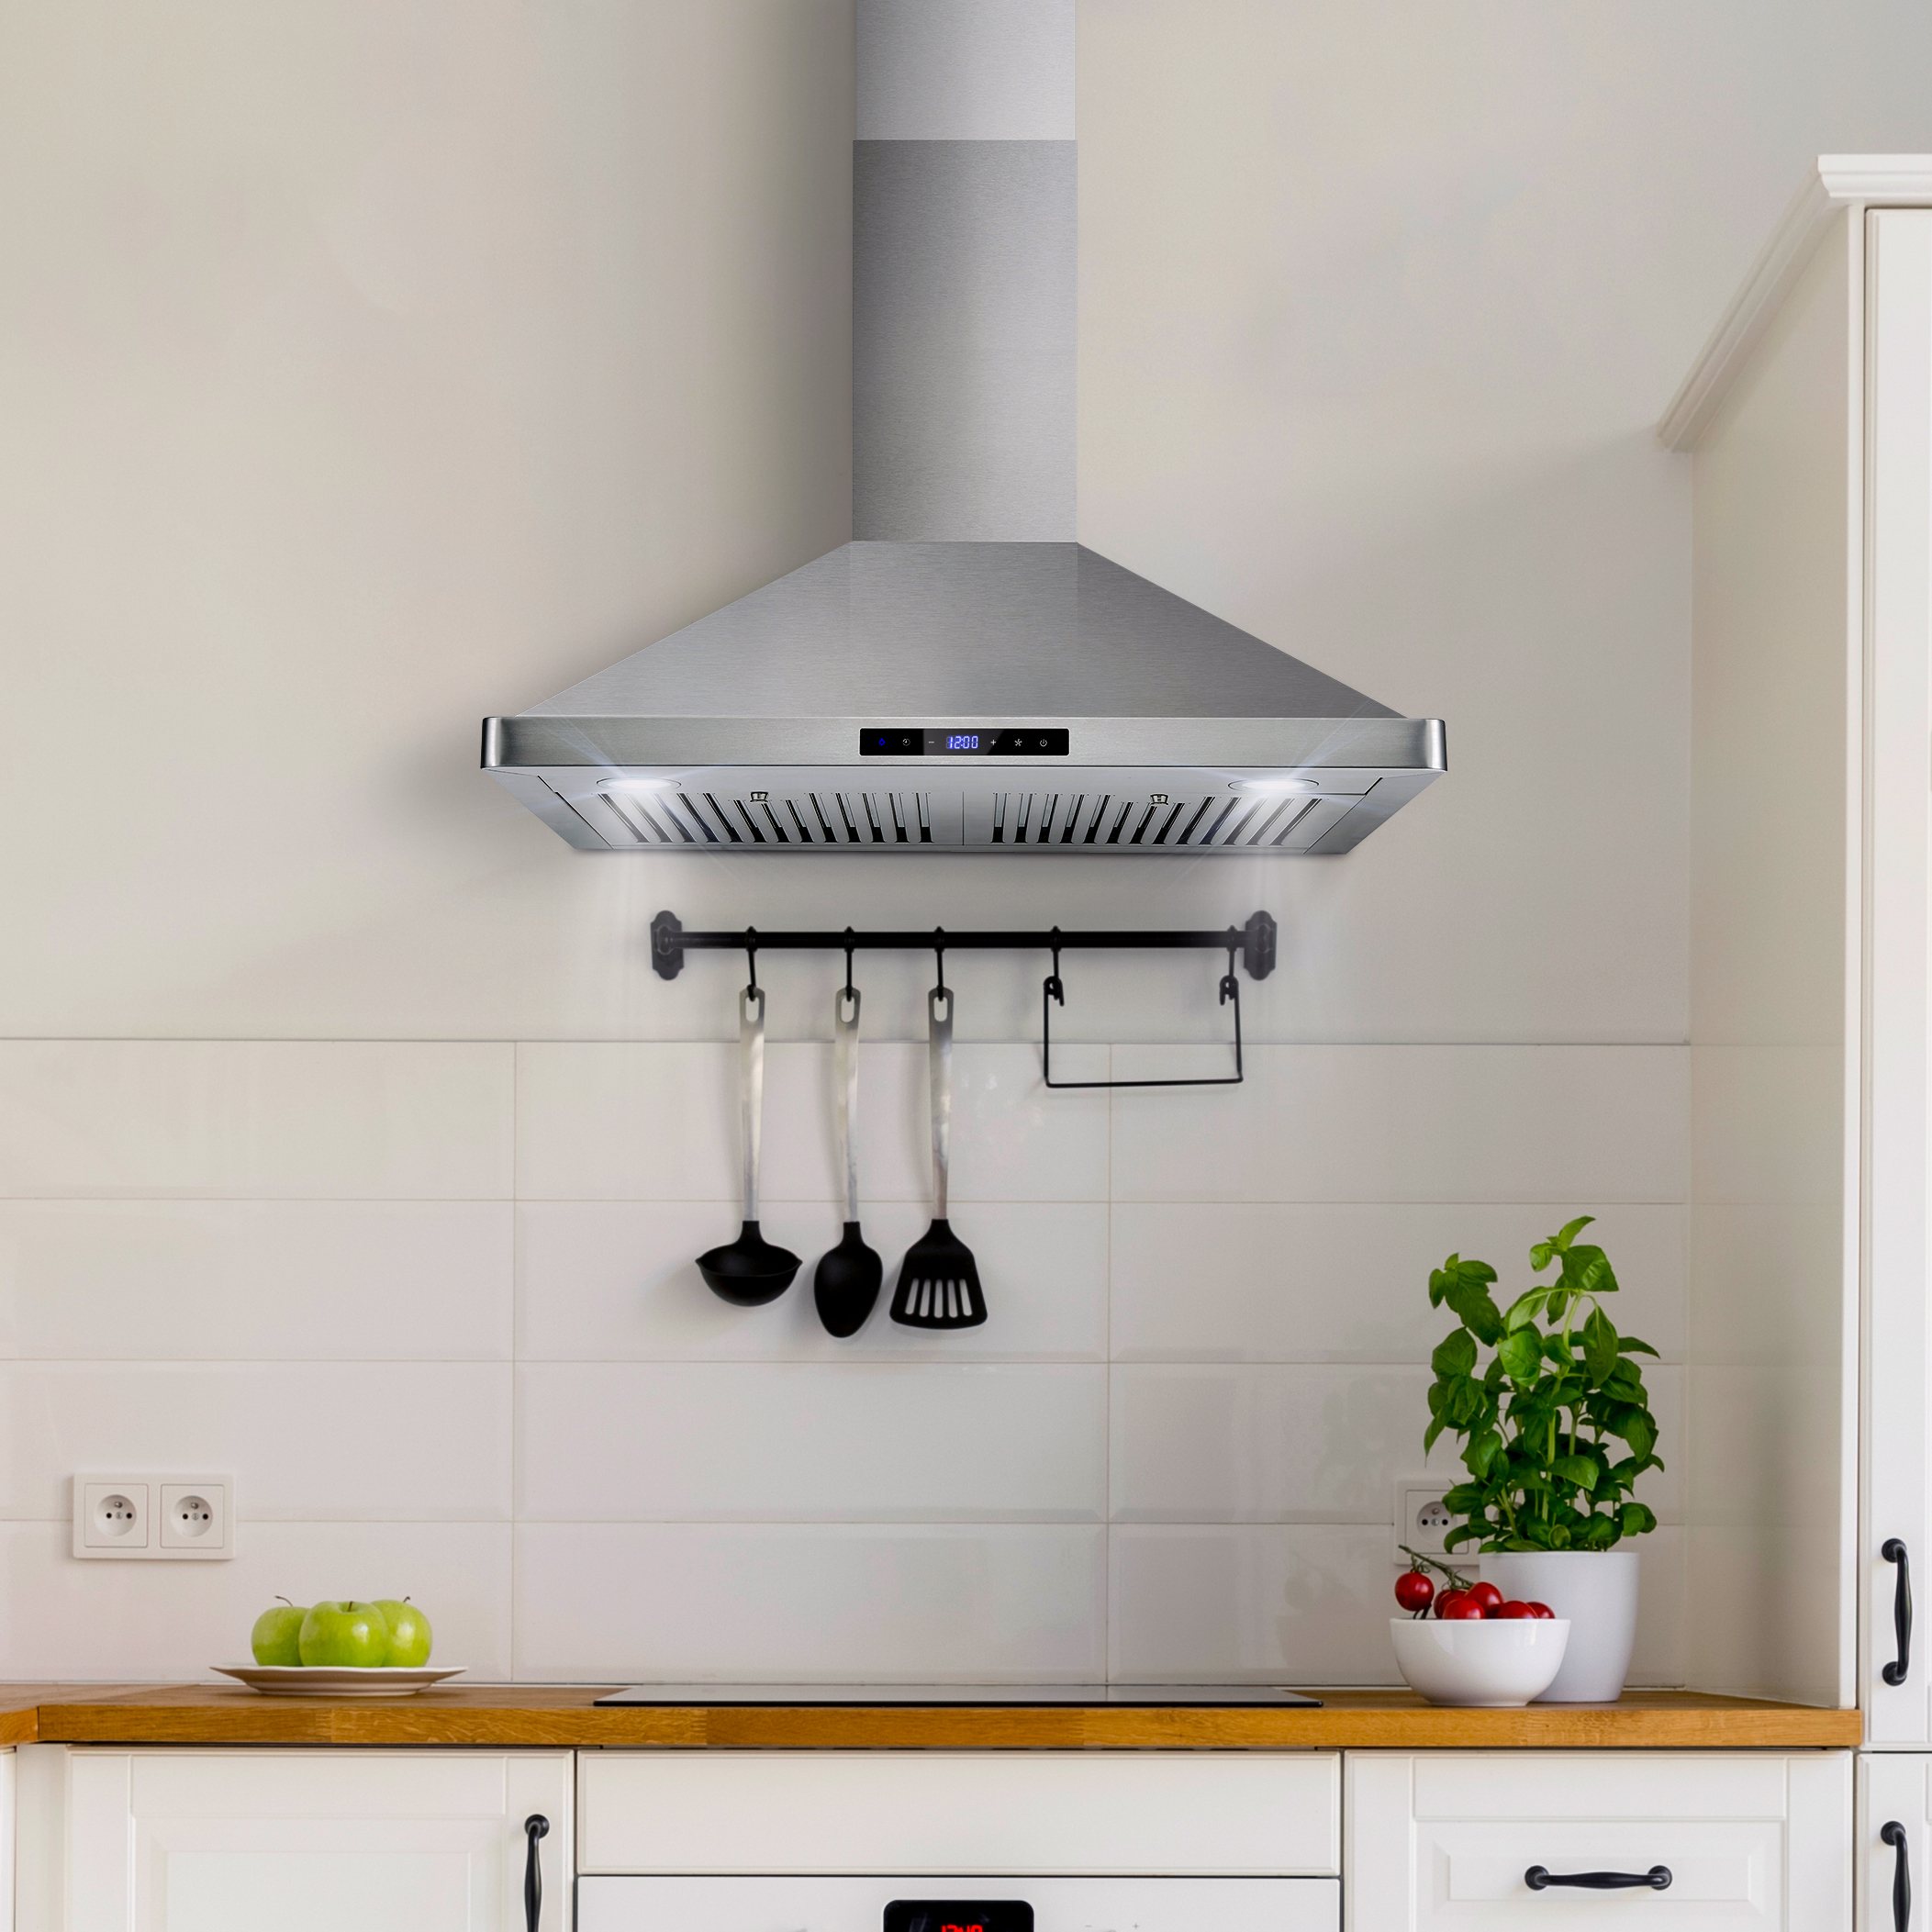 Cosmo’s COS-63175S: The Best Wall Mount Range Hood of 2021 as Featured on Bobvila.com